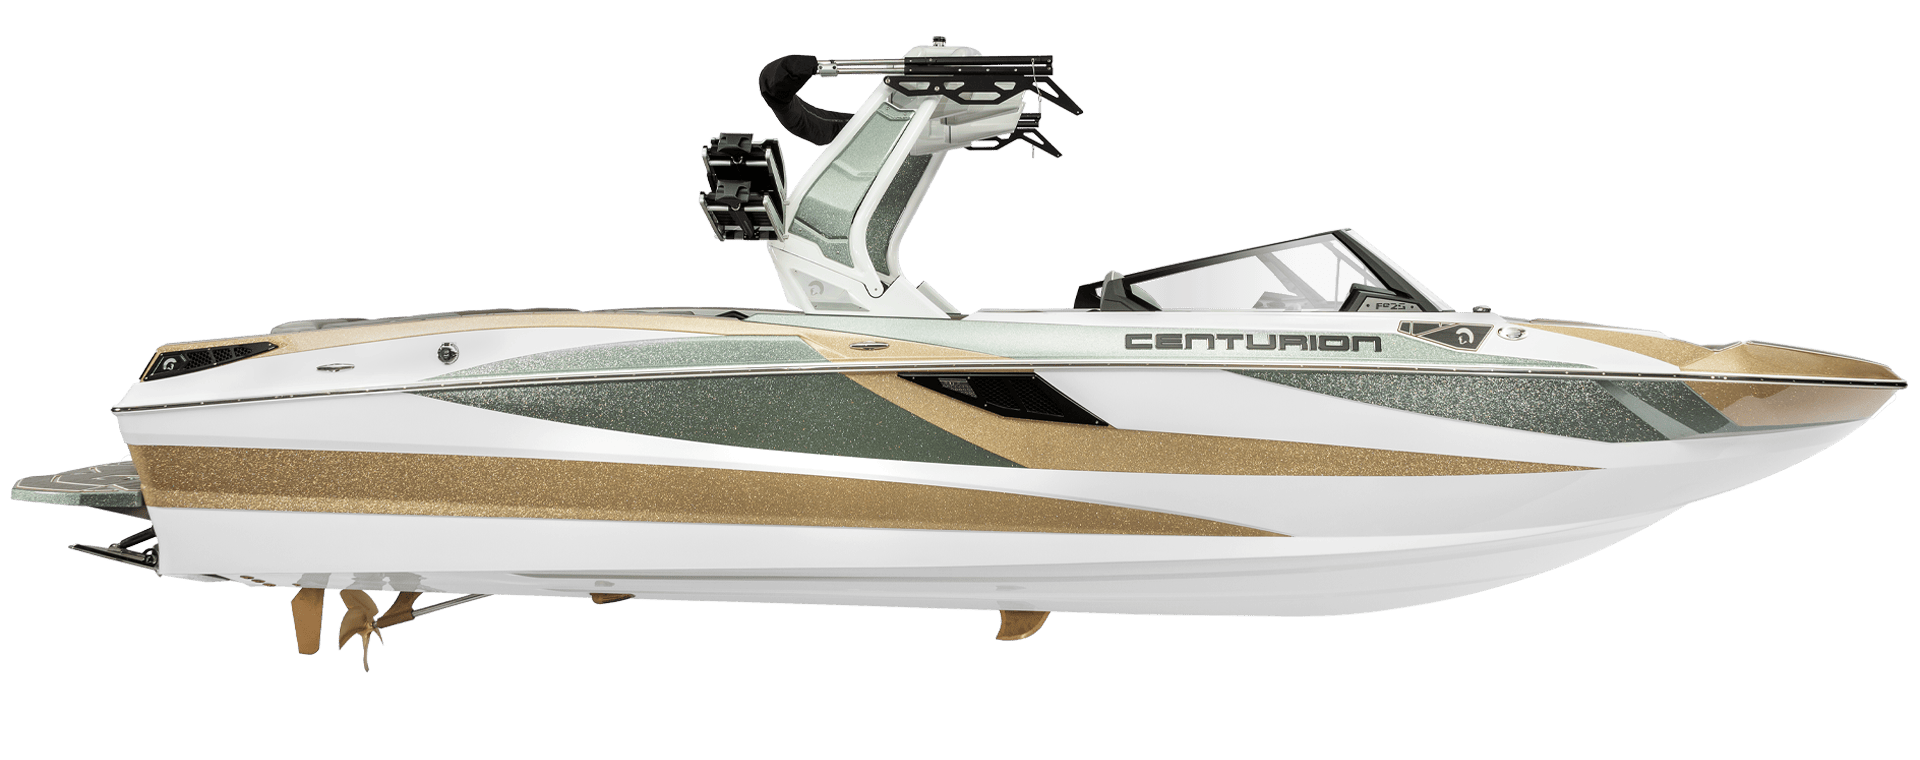 A sleek, modern speedboat from the Centurion Fe Series with a white and gold exterior, equipped with a wakeboard tower and proudly labeled 